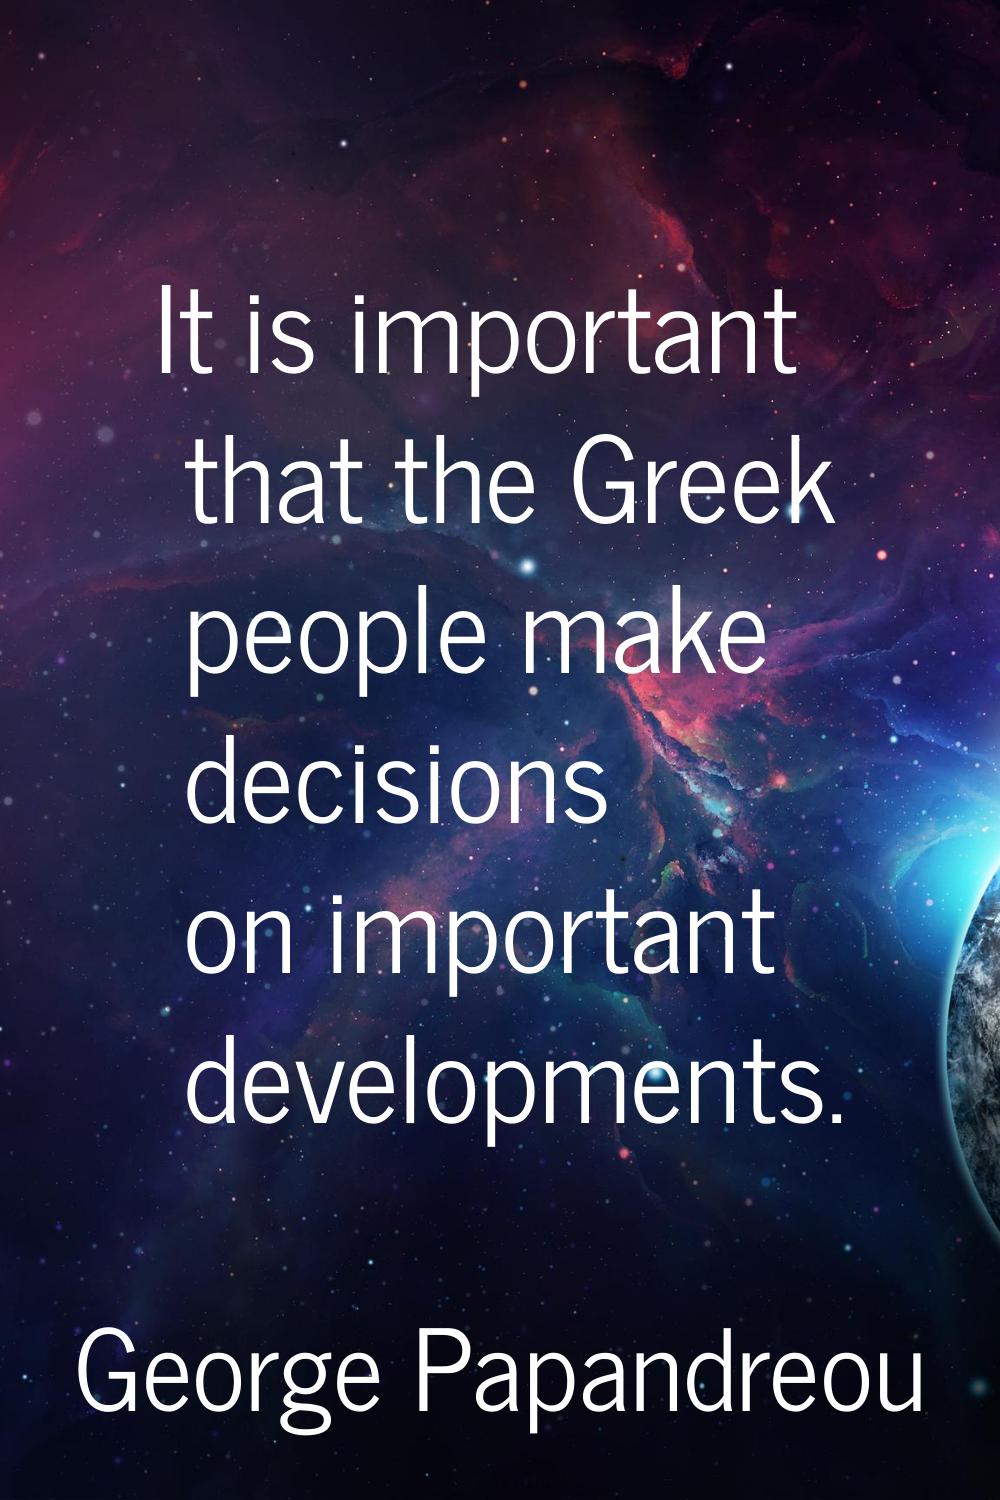 It is important that the Greek people make decisions on important developments.